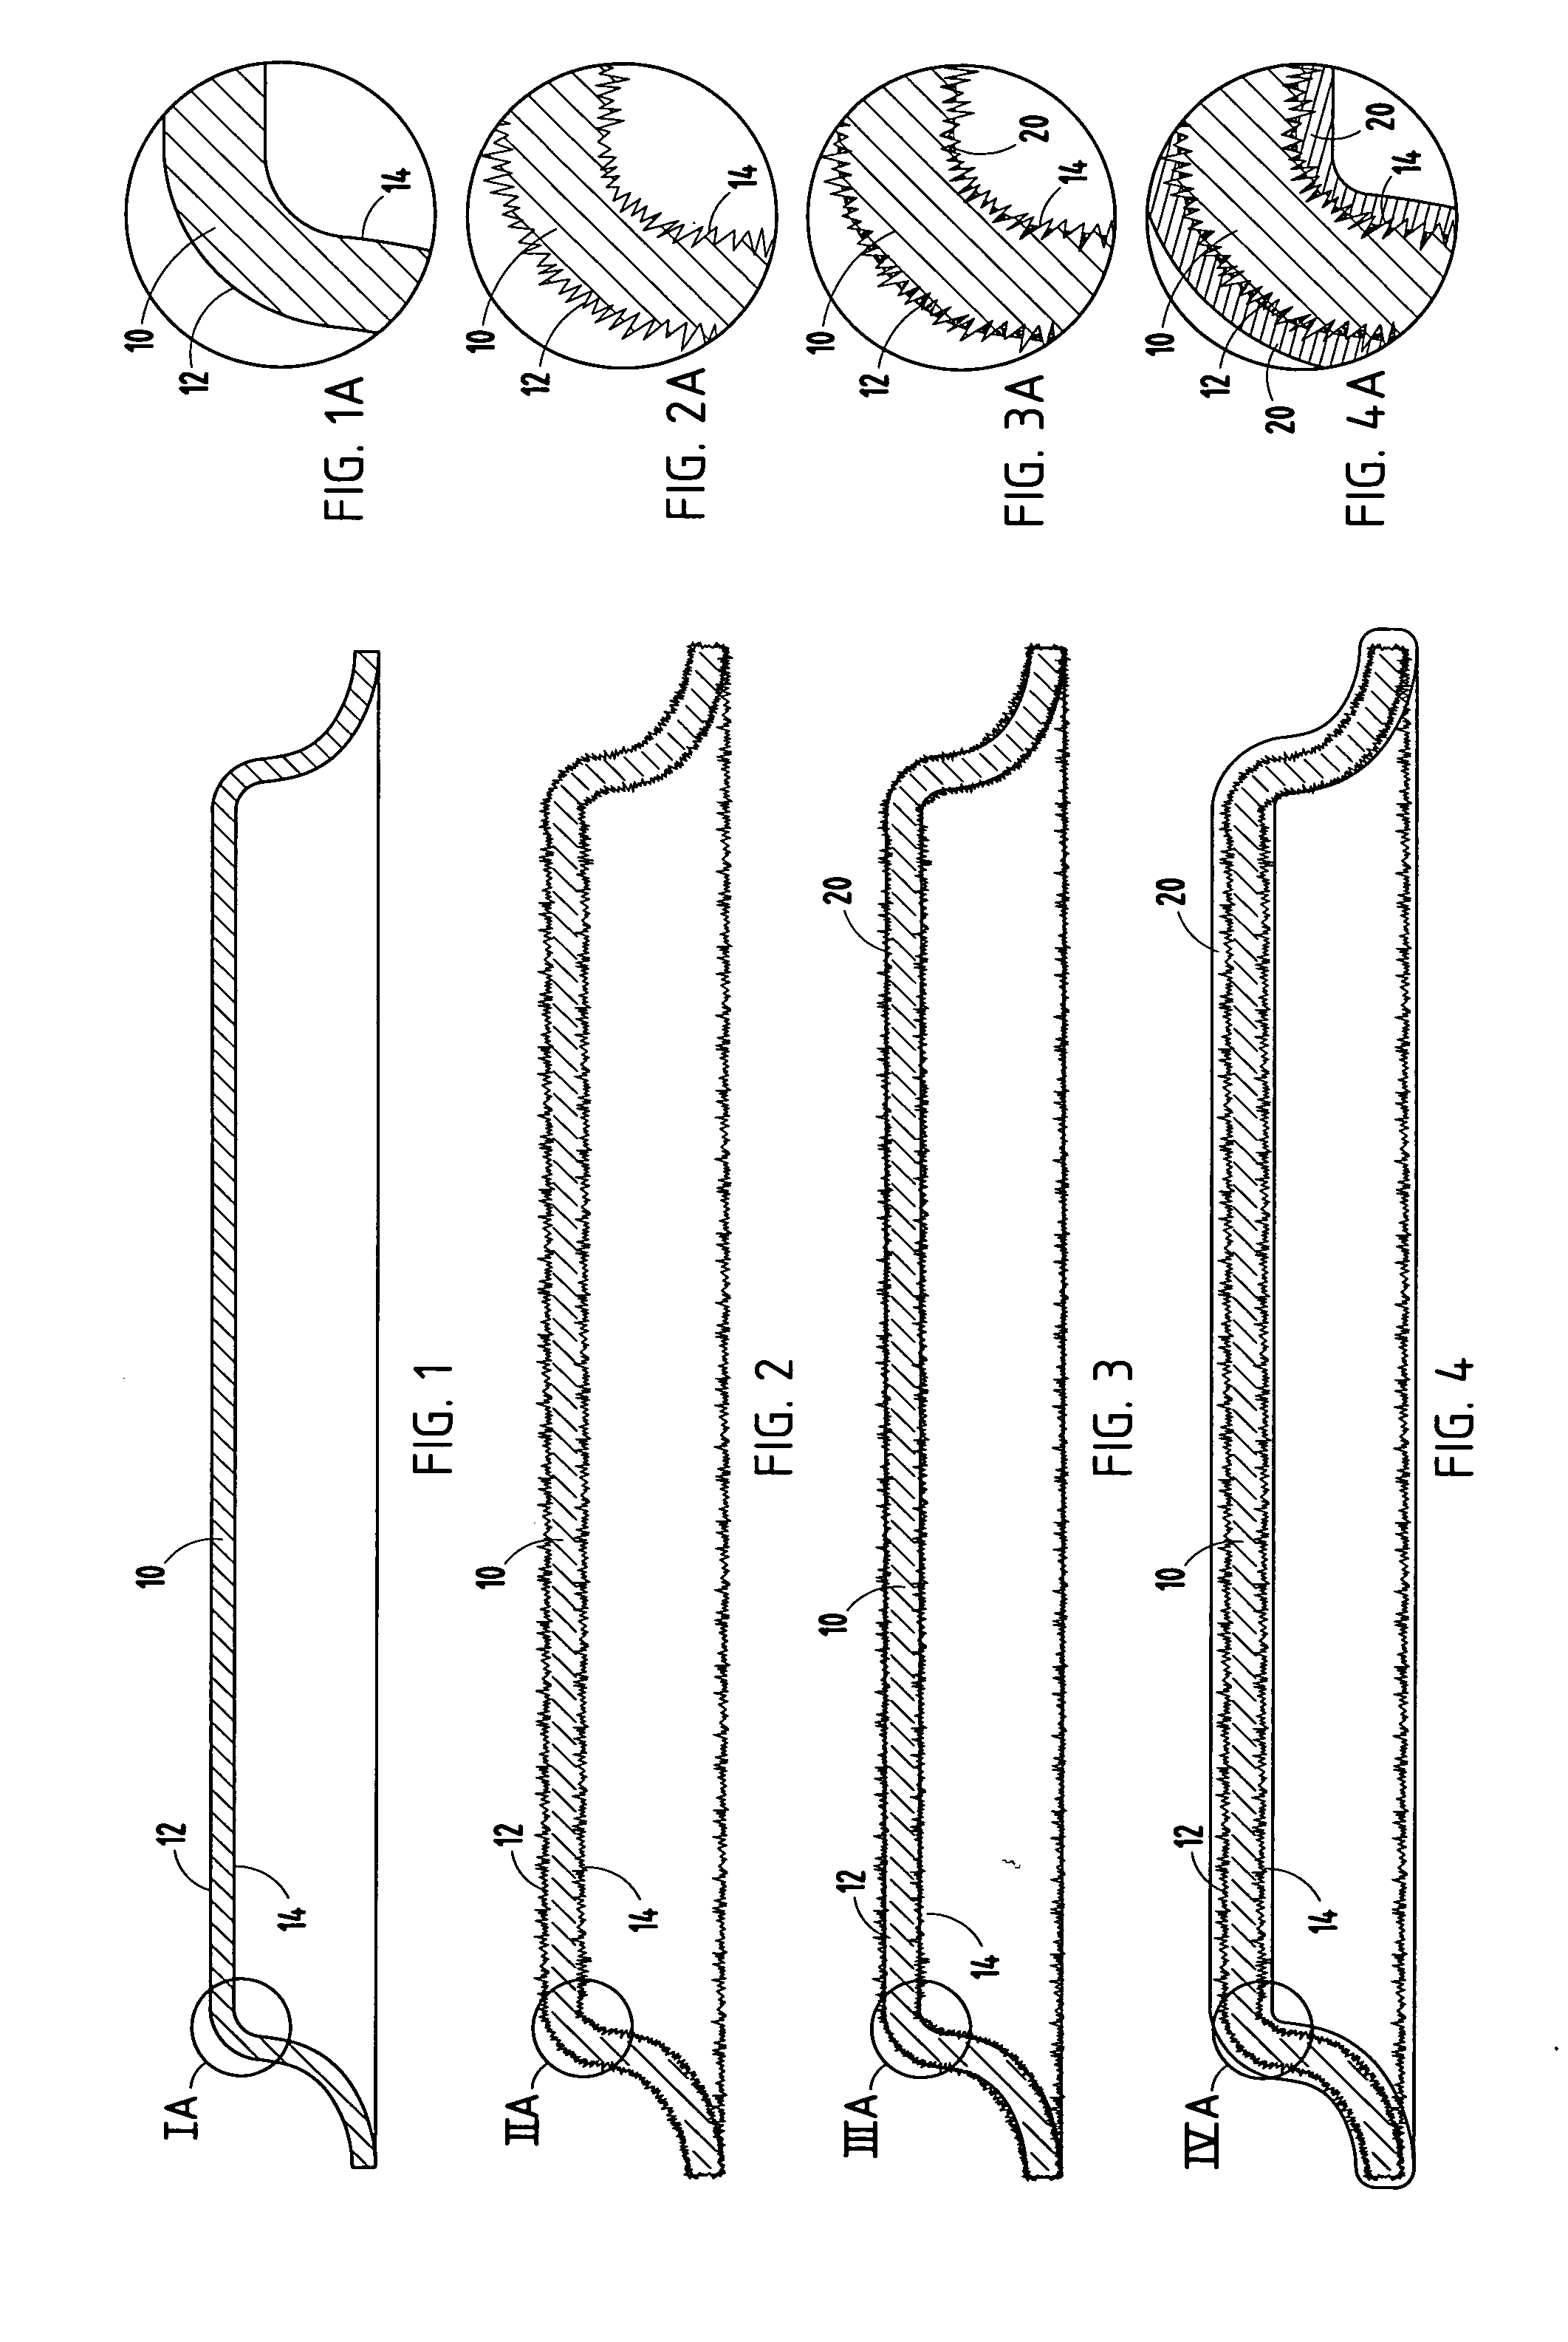 Method to signficantly increase electrophoretic coating thickness and/or to provide a conductive electrophoretically coated surface